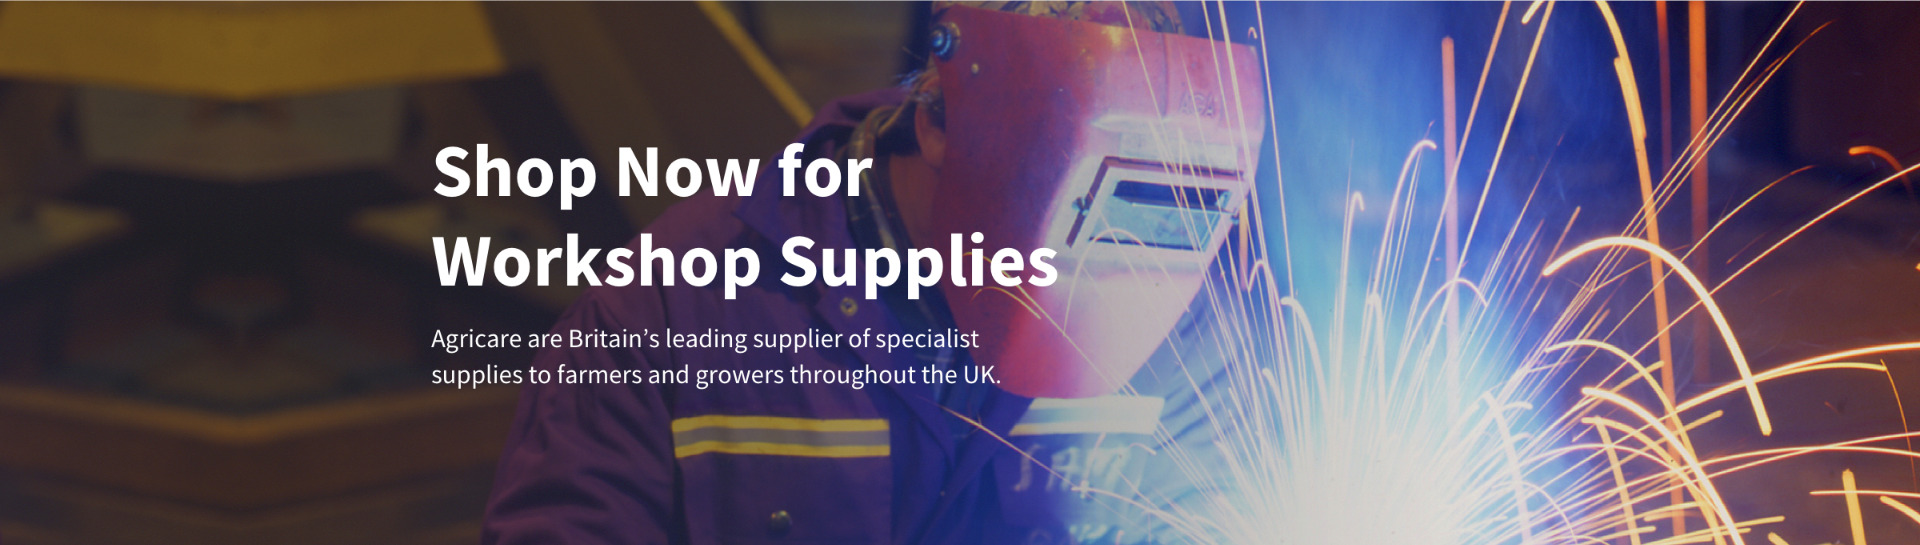 Shop Now for Workshop Supplies. Agricare are Britain's leading supplier of specialist supplies to farmers and growers throughout the UK